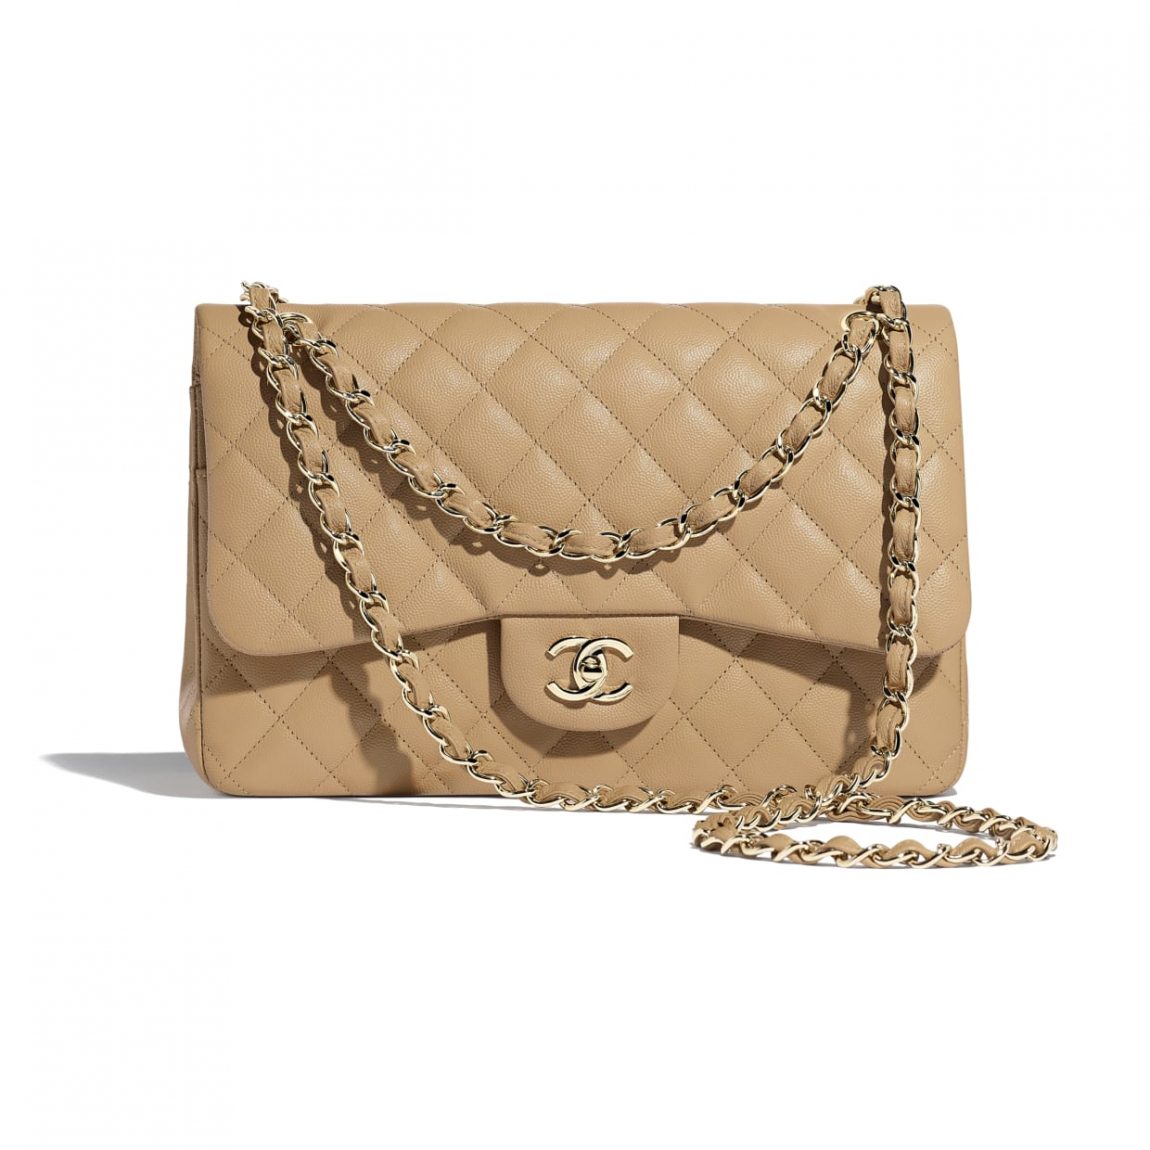 Chanel Classic Bag Price Increases Starting Nov 1, 2019 | Spotted Fashion